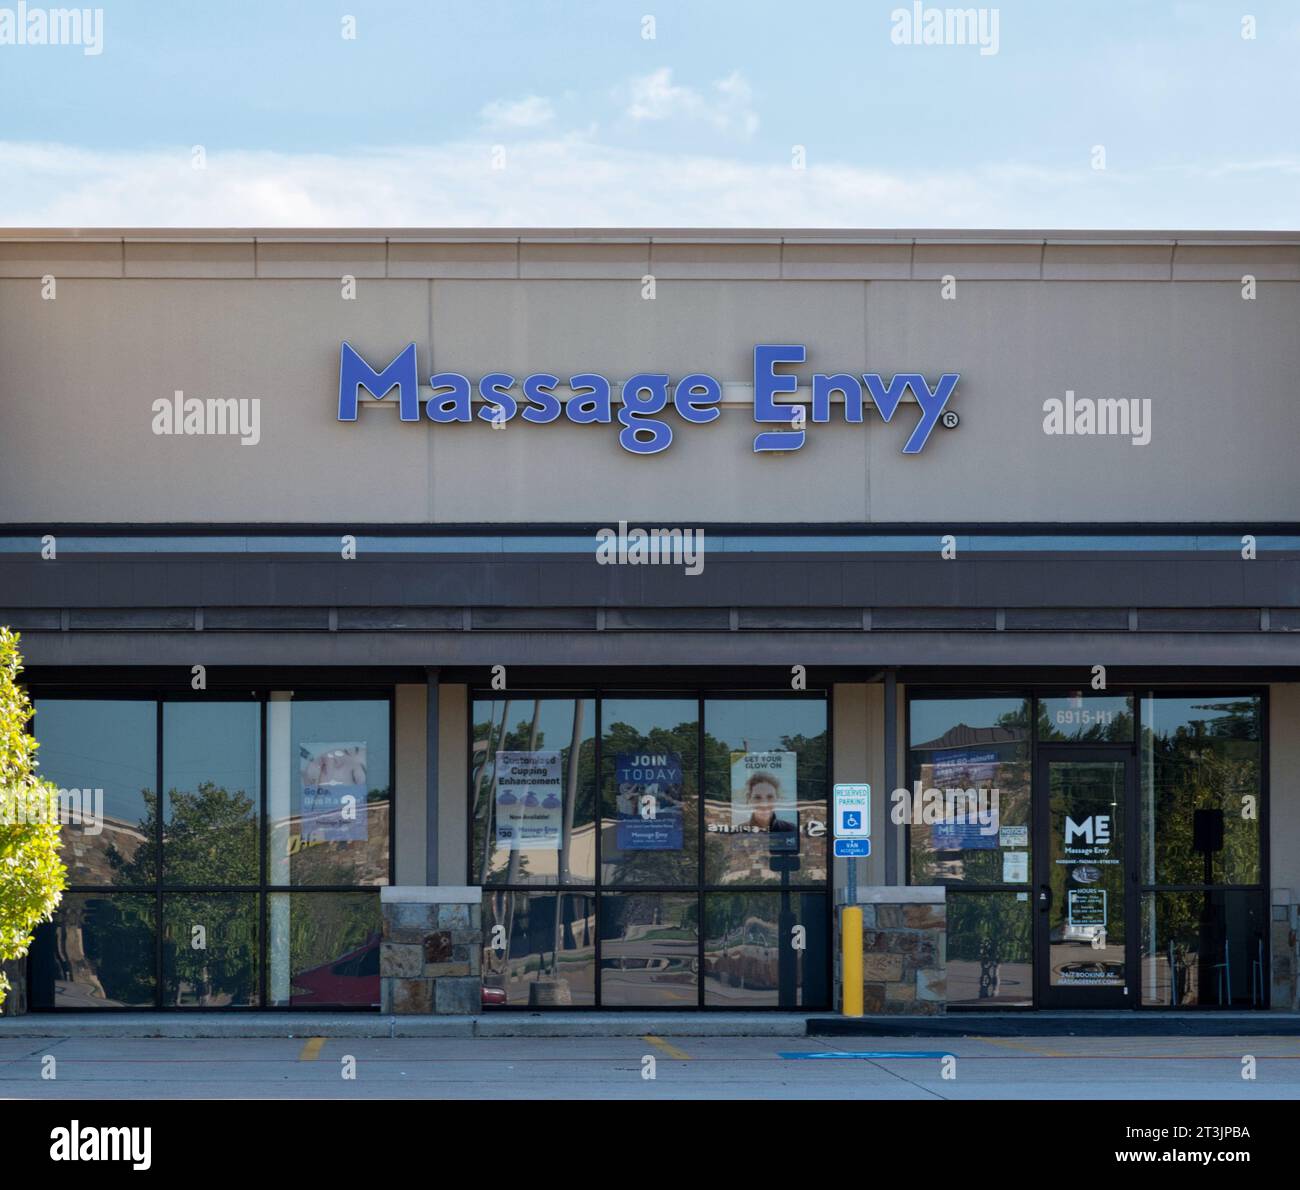 Houston, Texas USA 09-24-2023: Massage Envy company storefront exterior in Houston, TX. American massage and skin care business franchise. Stock Photo